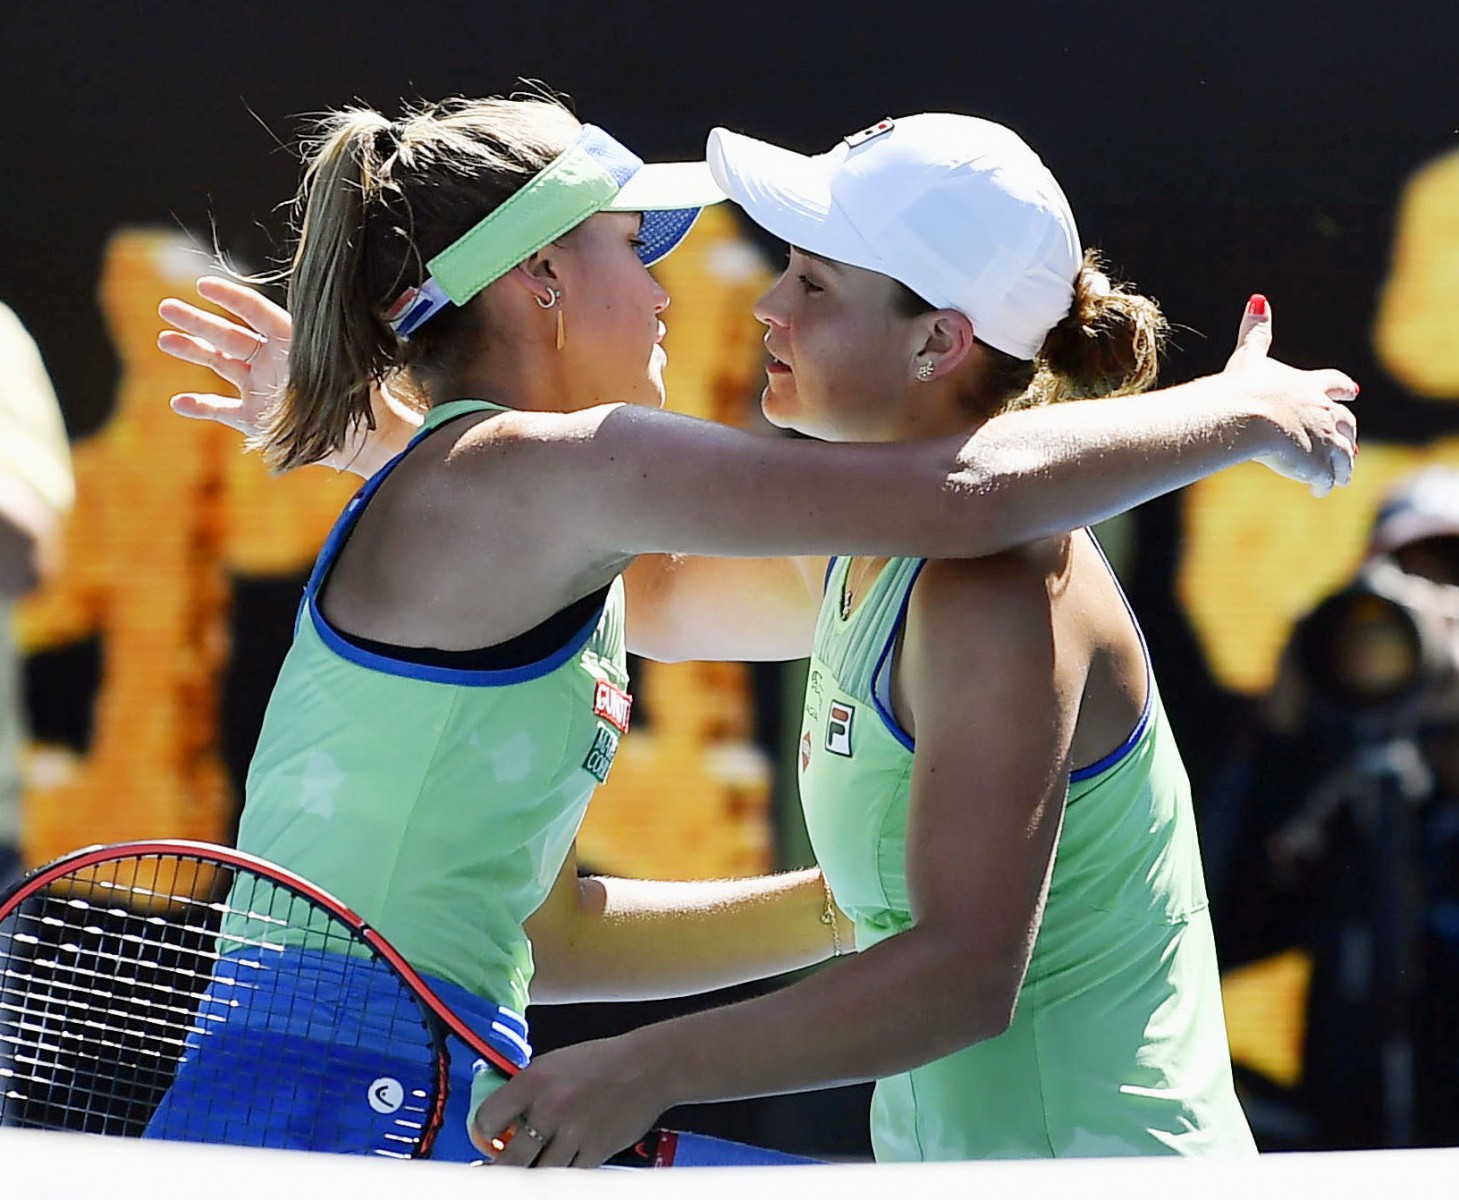 , Sofia Kenin dispatches Ash Barty to earn spot in Australian Open final and move past Serena in rankings